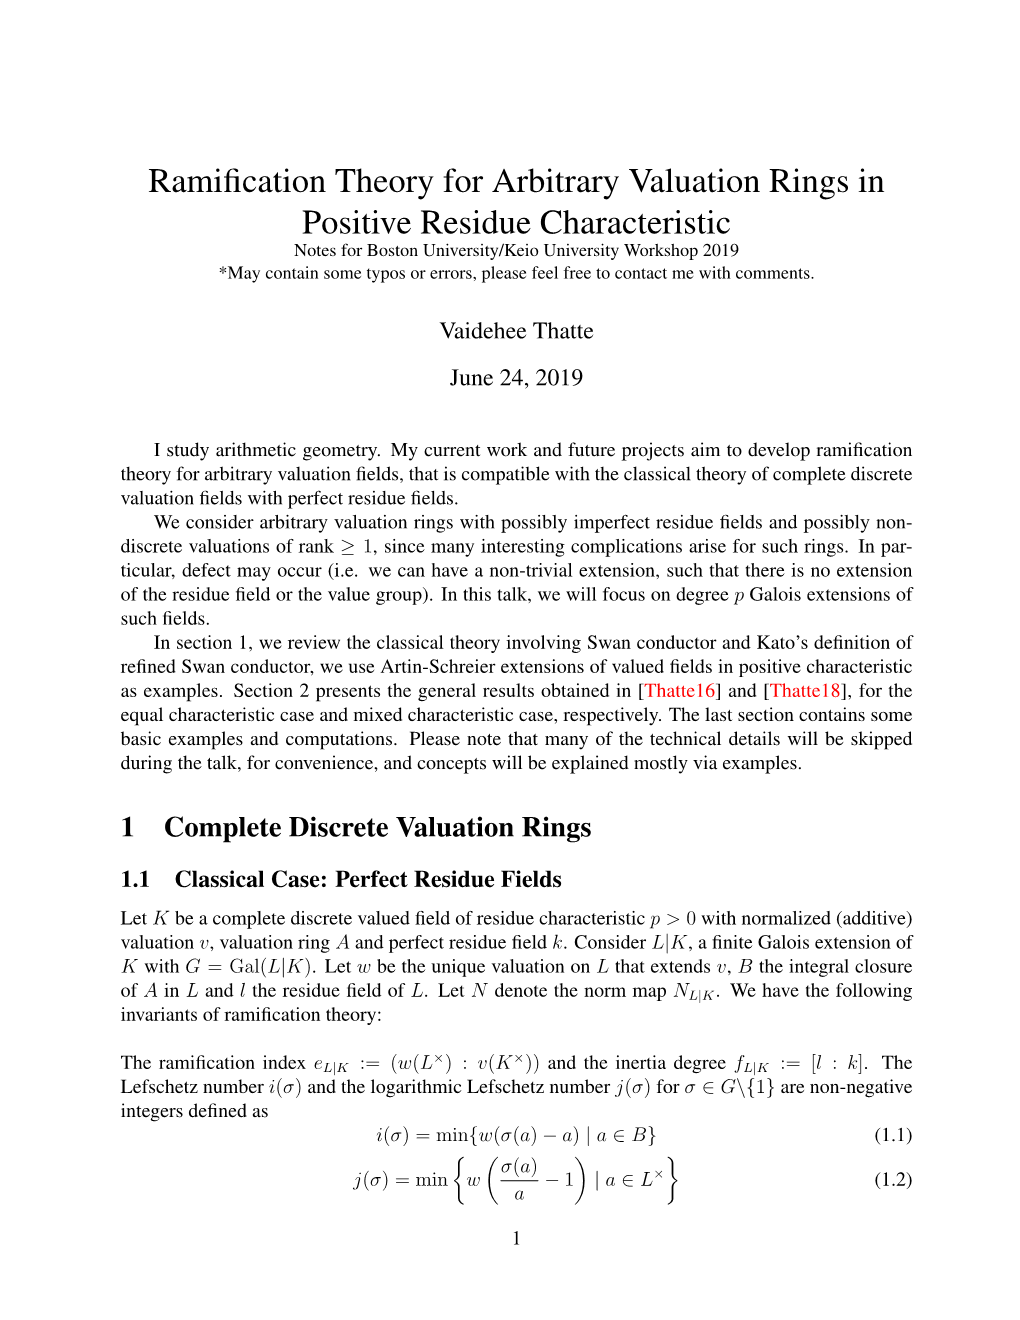 Ramification Theory for Arbitrary Valuation Rings in Positive Residue